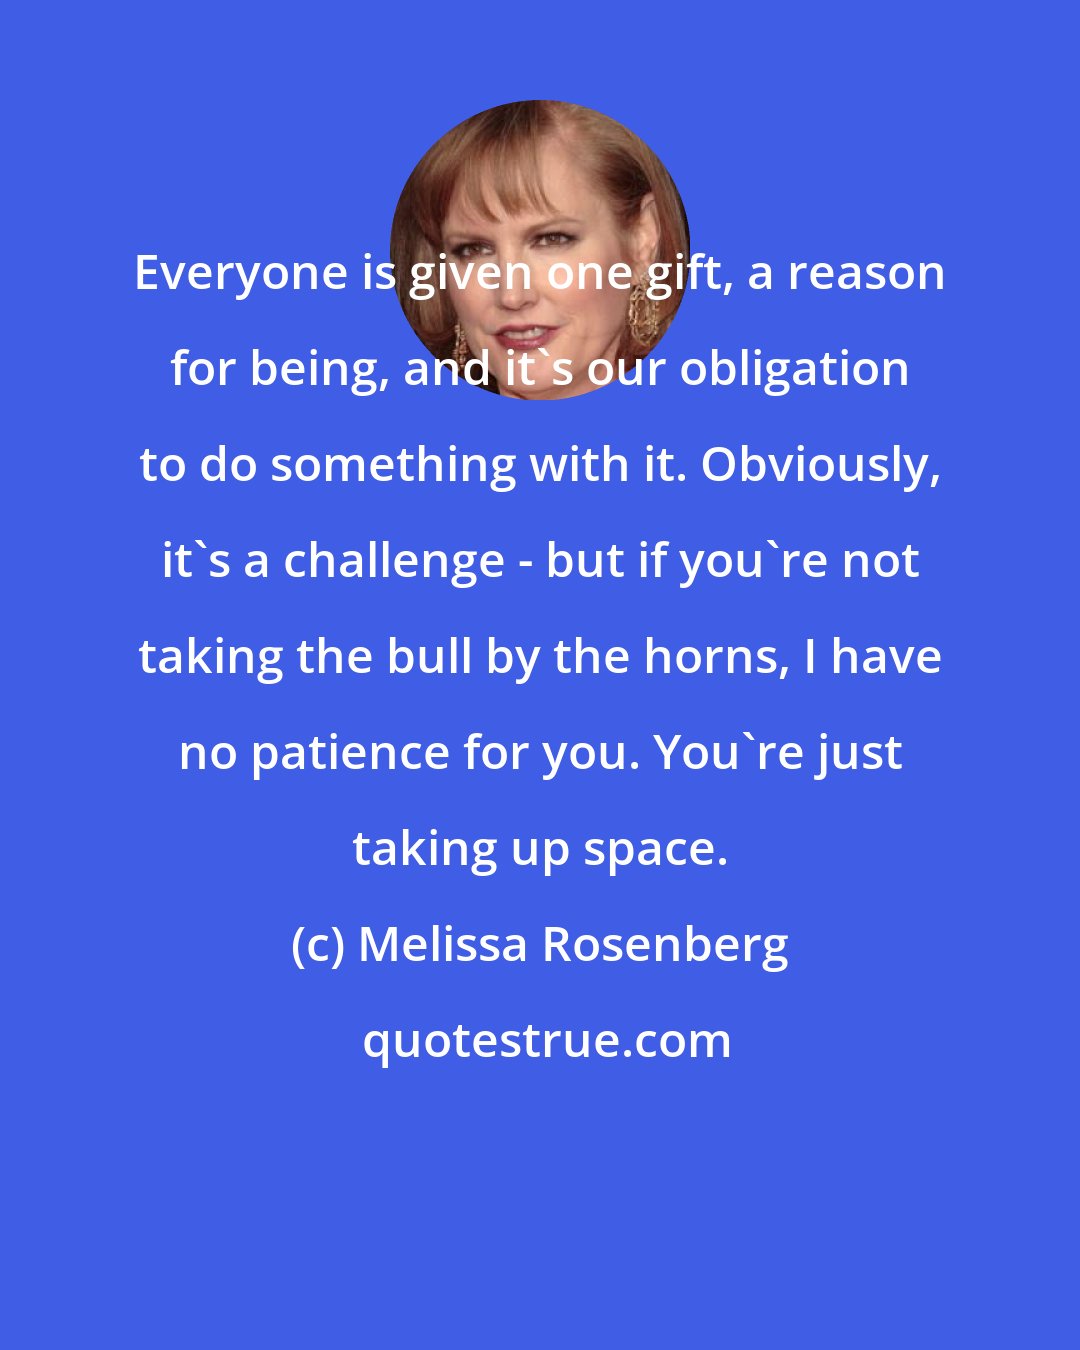 Melissa Rosenberg: Everyone is given one gift, a reason for being, and it's our obligation to do something with it. Obviously, it's a challenge - but if you're not taking the bull by the horns, I have no patience for you. You're just taking up space.